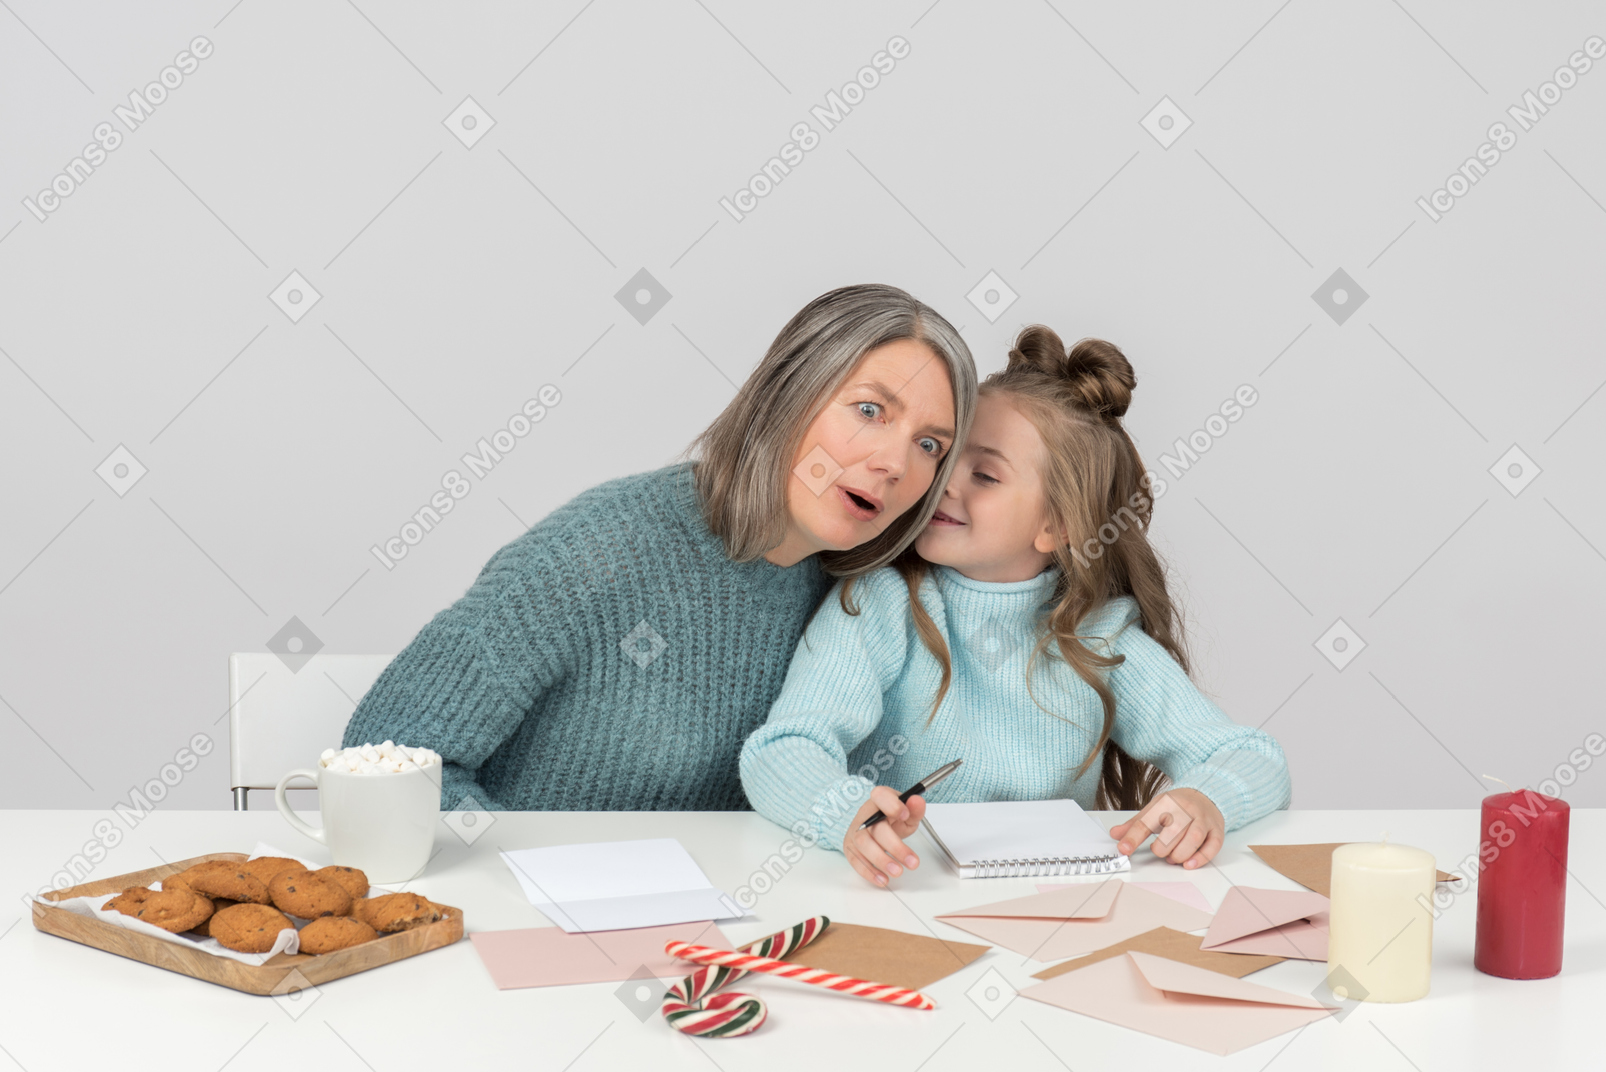 Grandmother and granddaughter writing a letter to santa together